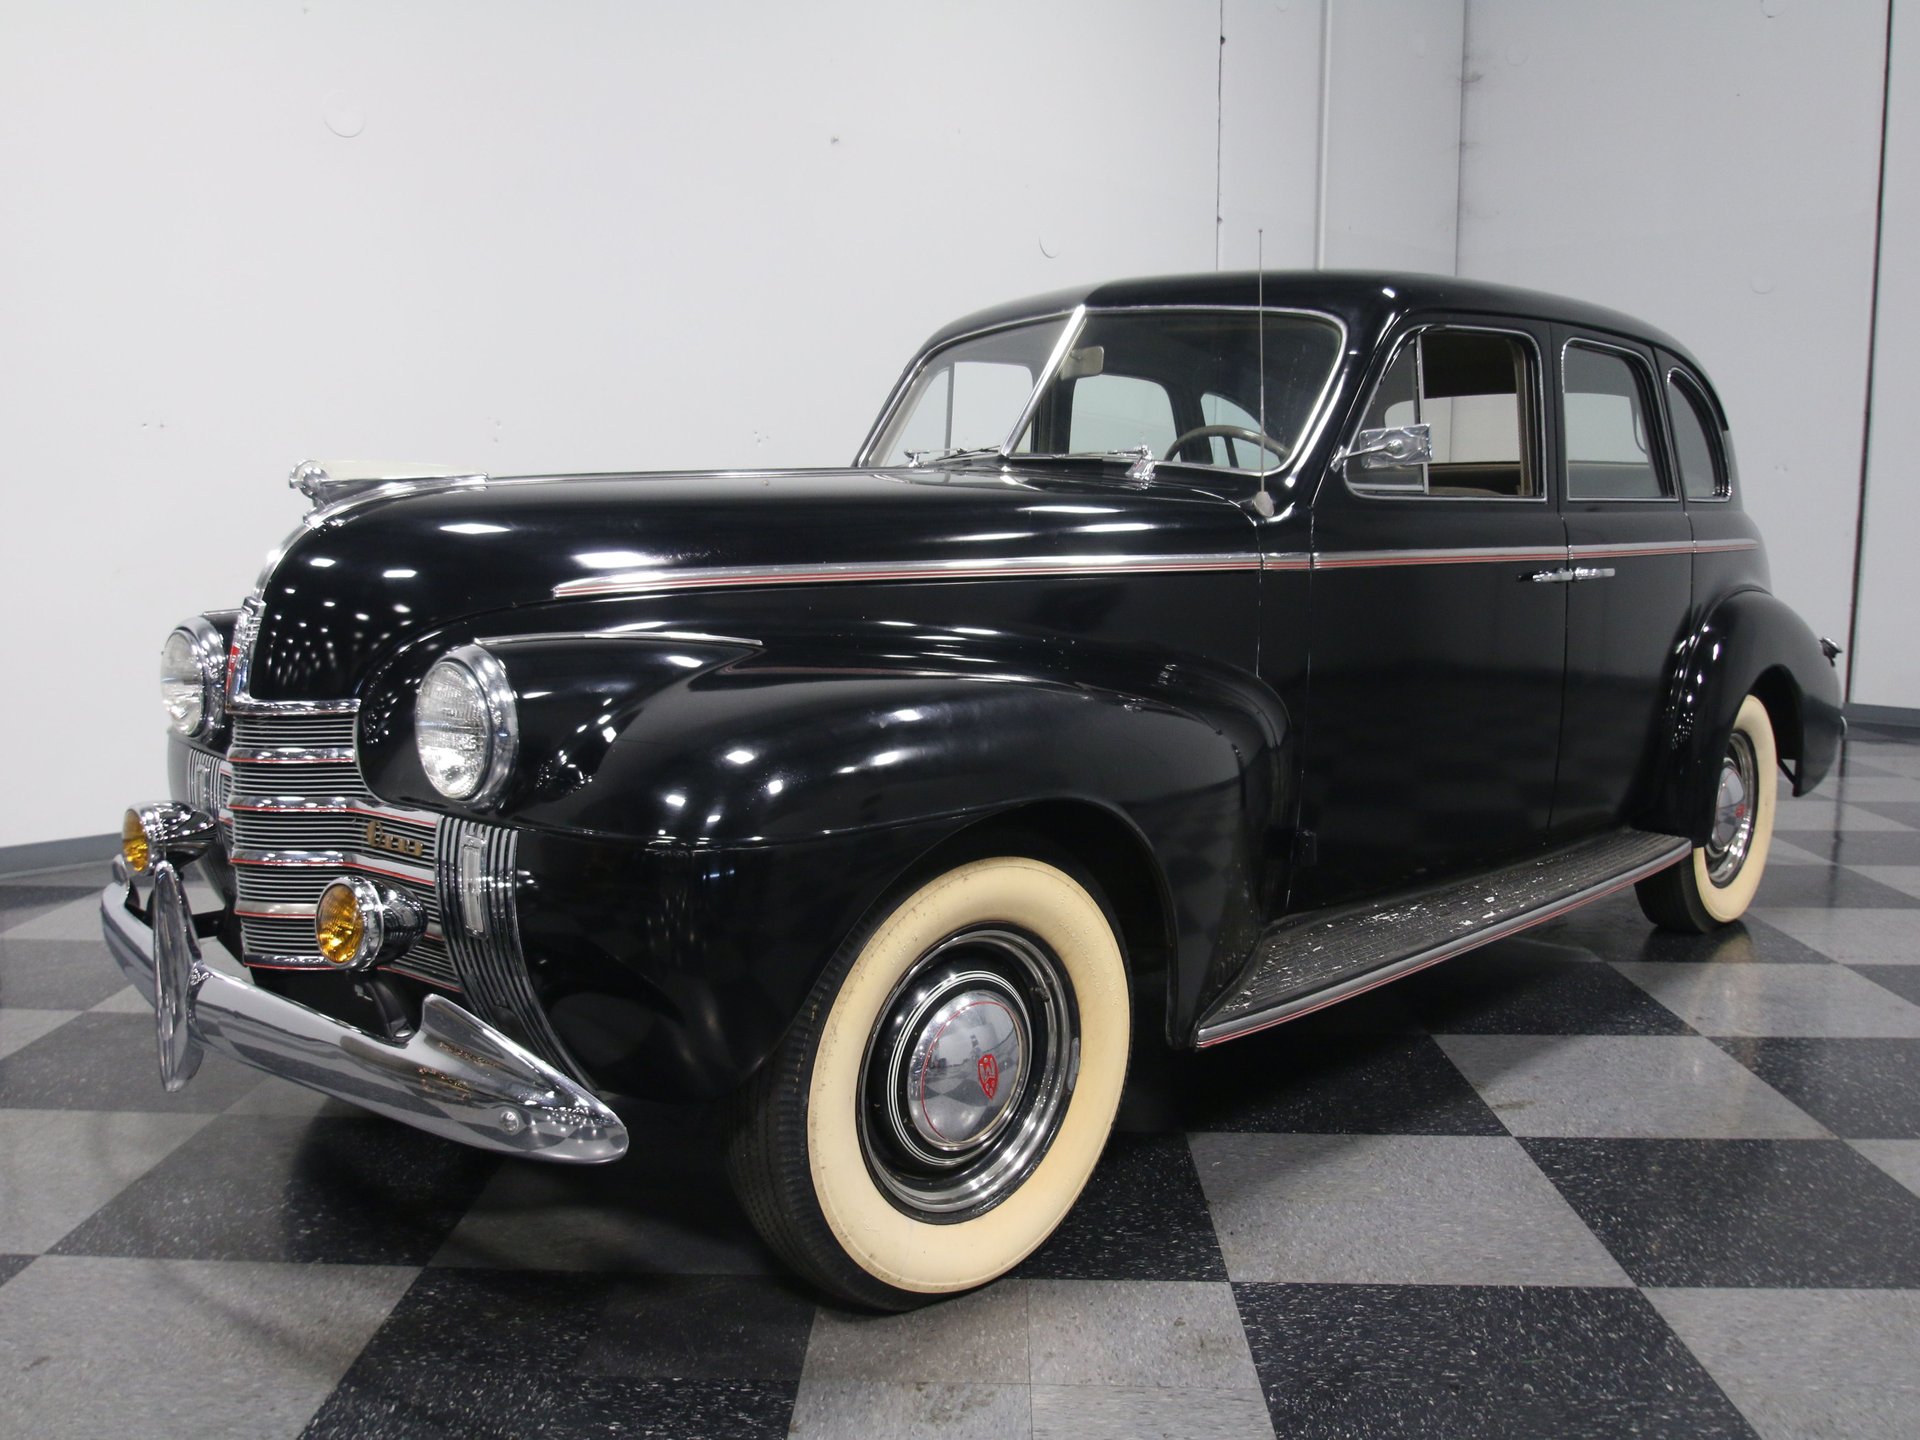 freedom Fore type Assert 1940 Oldsmobile Series 70 | Classic Cars for Sale - Streetside Classics